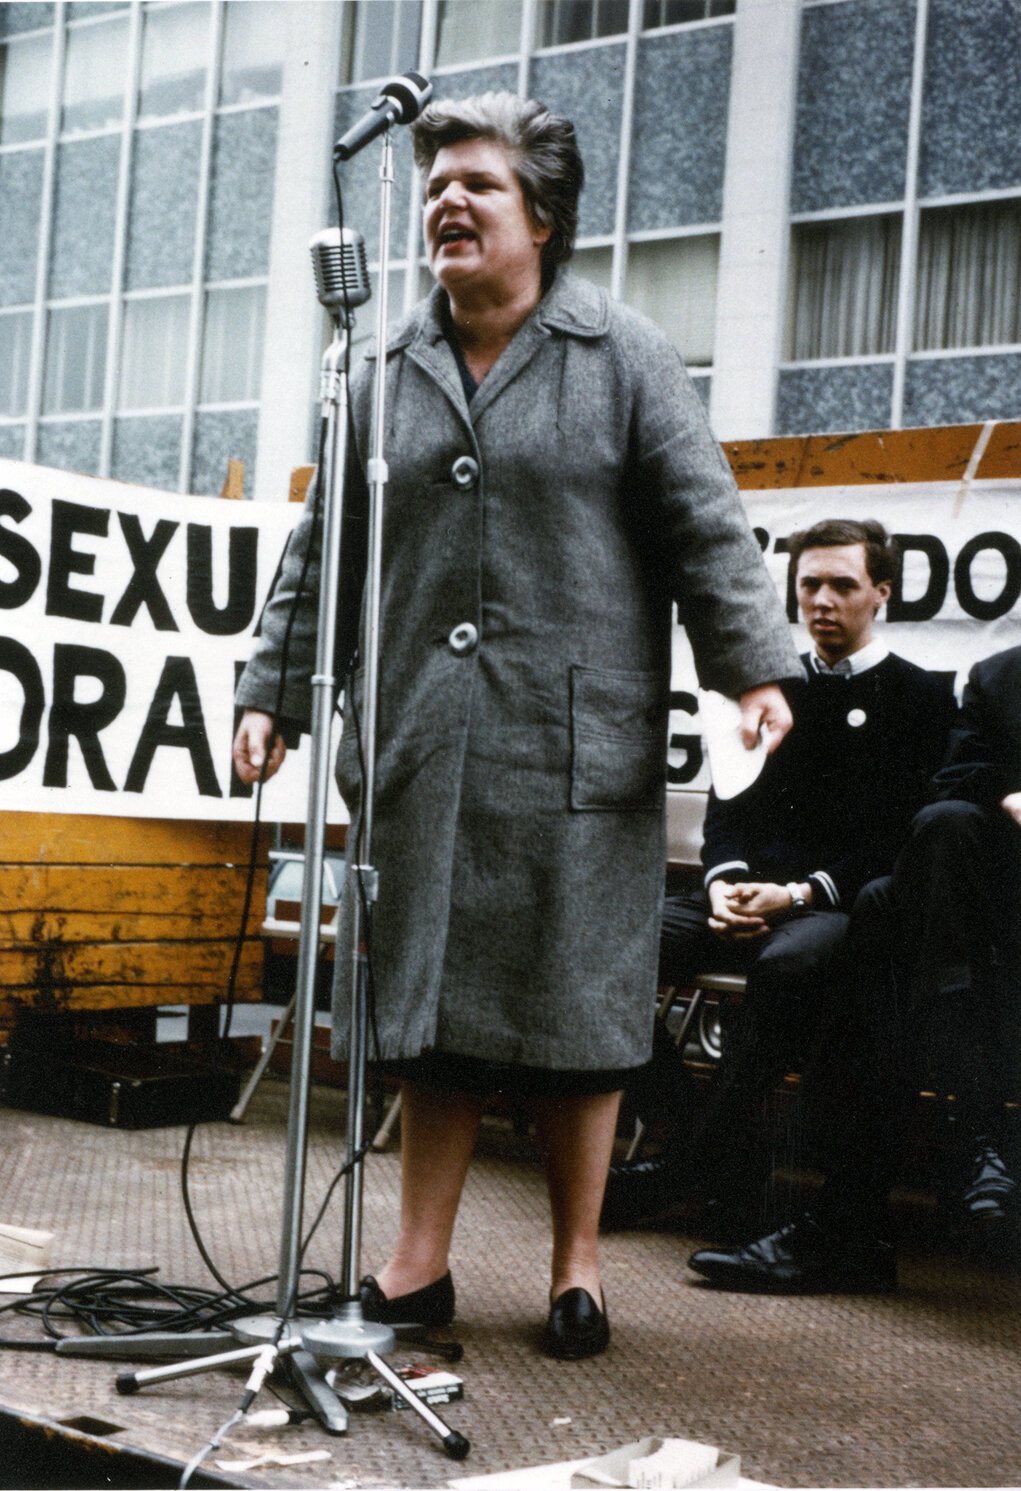 Martin at protest, 1966 